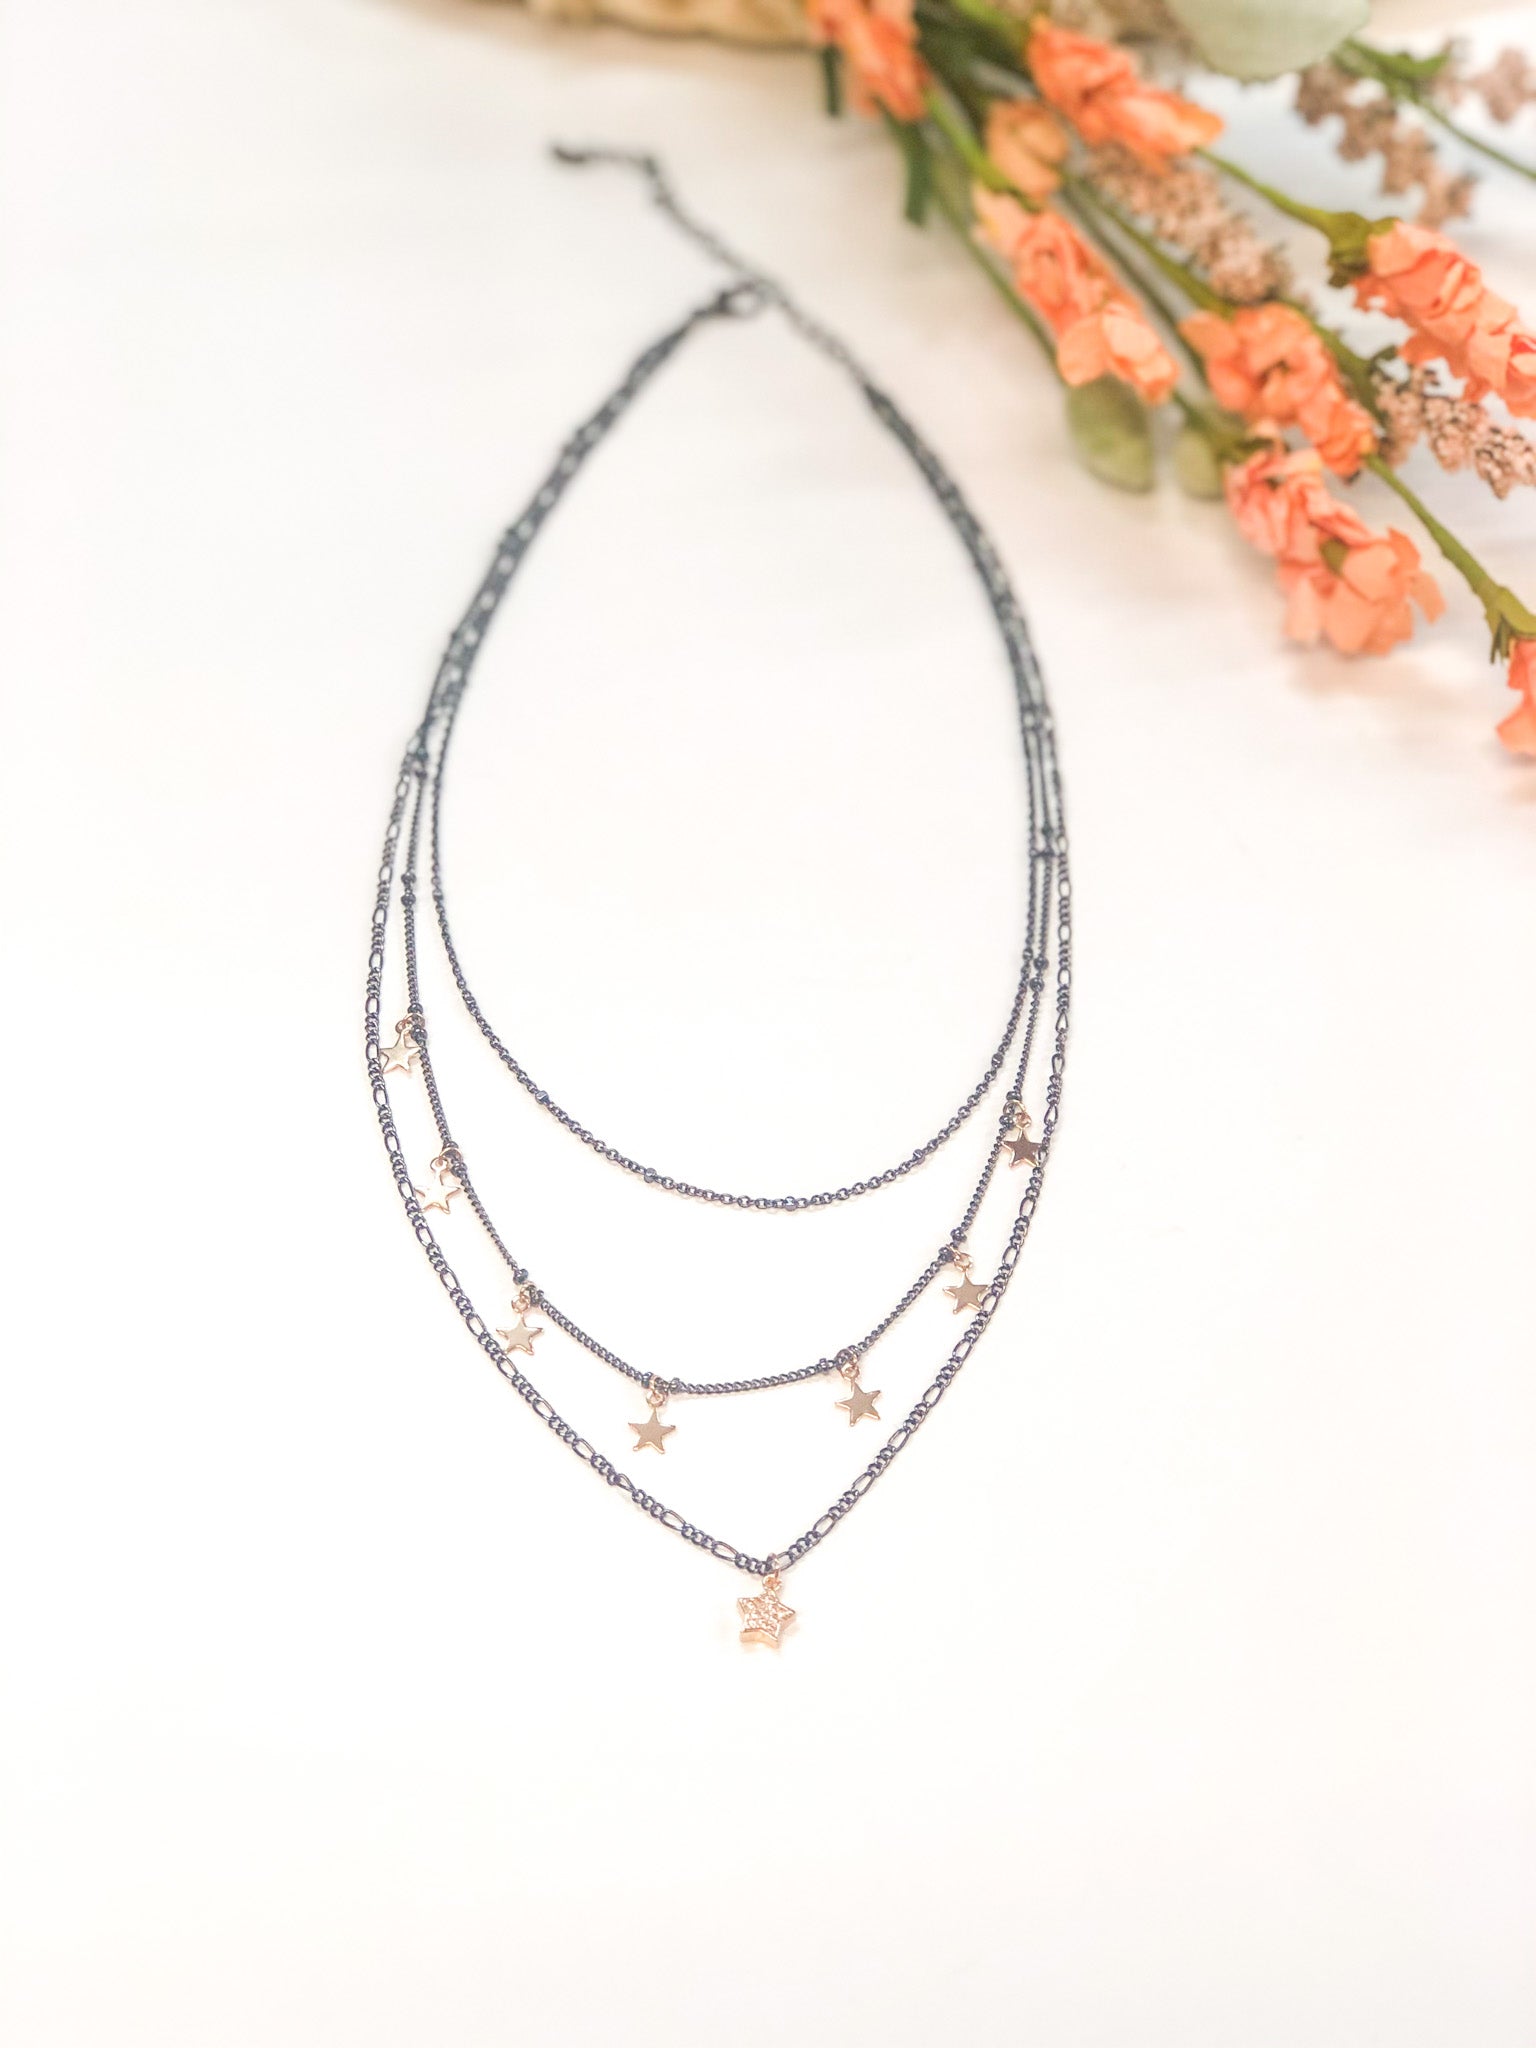 Cosmic Vibes Three Strand Necklace with Stars in Gunmetal and Gold - Giddy Up Glamour Boutique